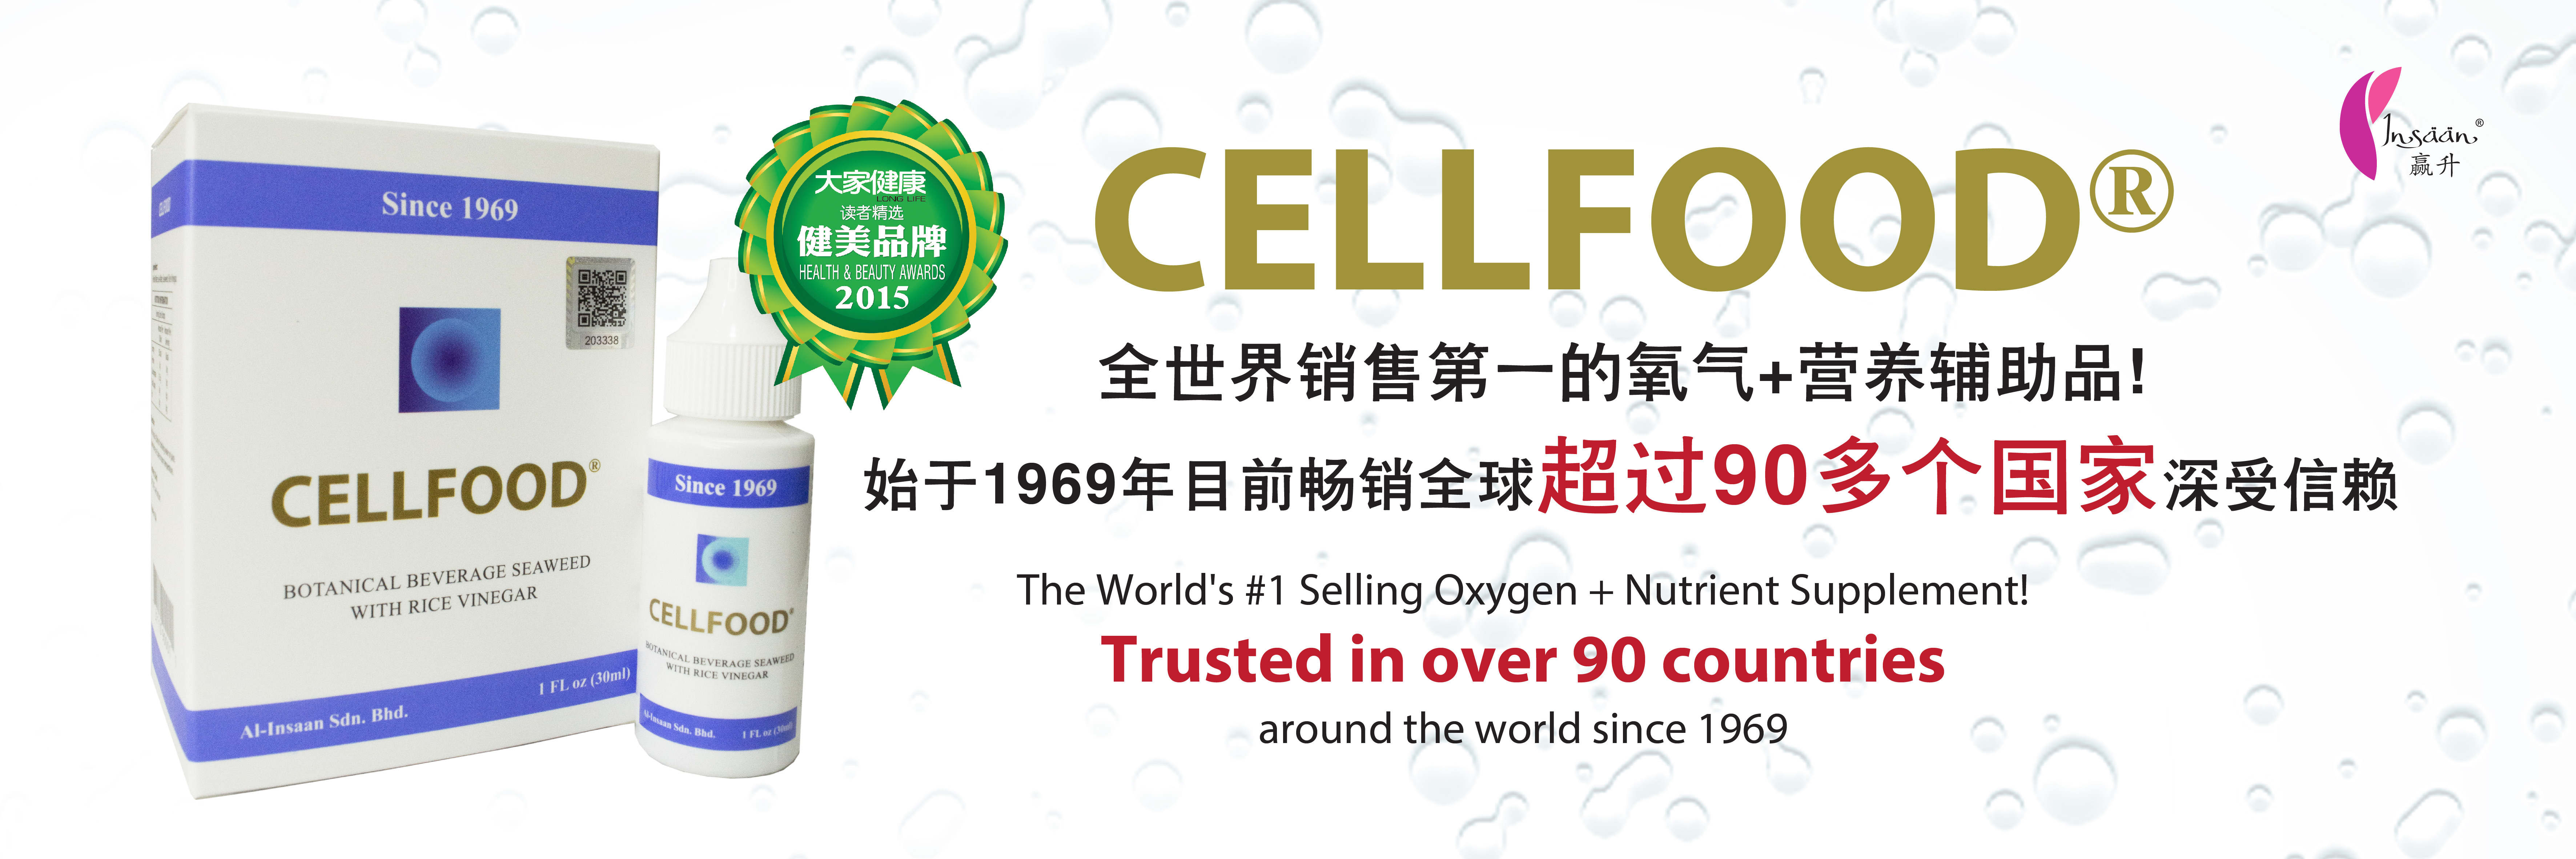 Cellfood Banner